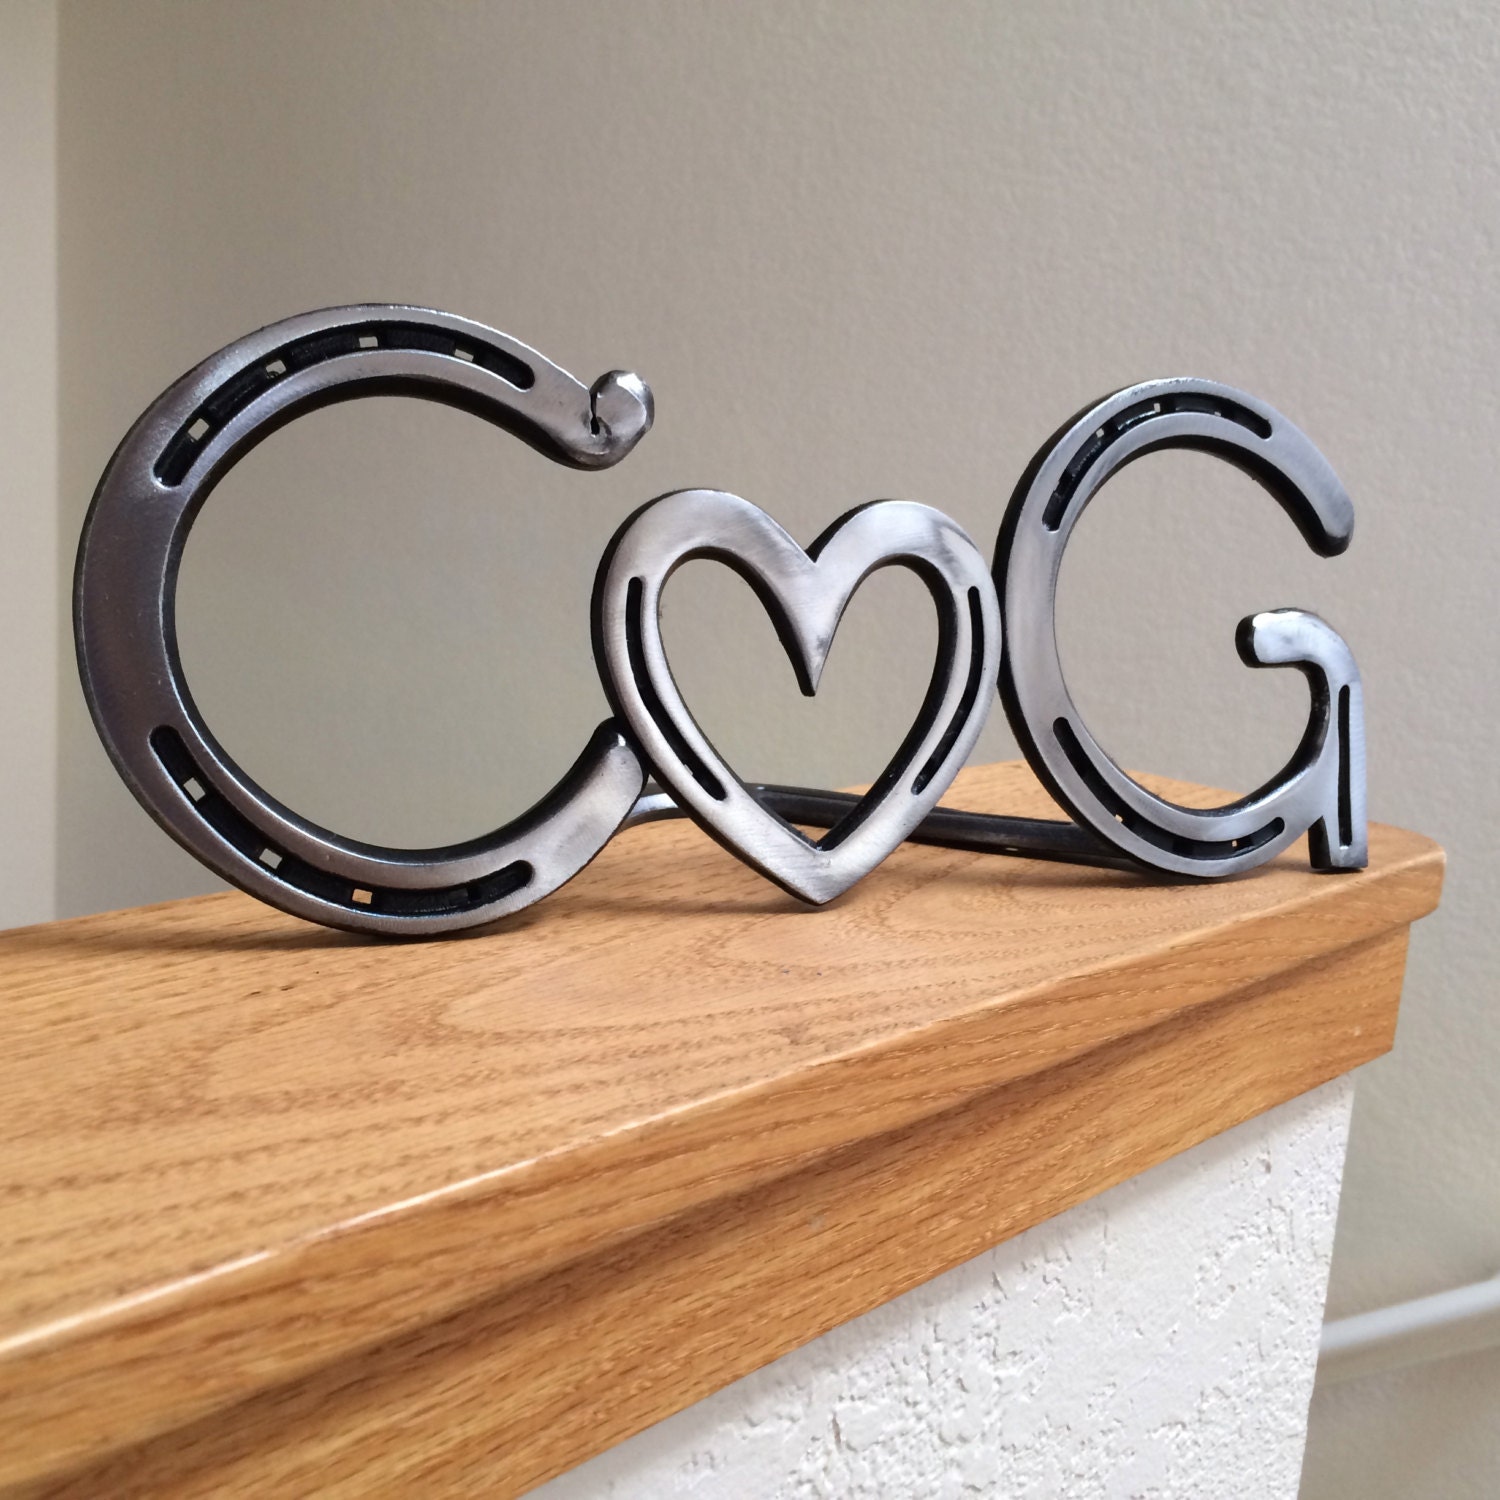 Personalized horseshoe heart couple sign, country wedding gift or centerpiece decor, engraving available